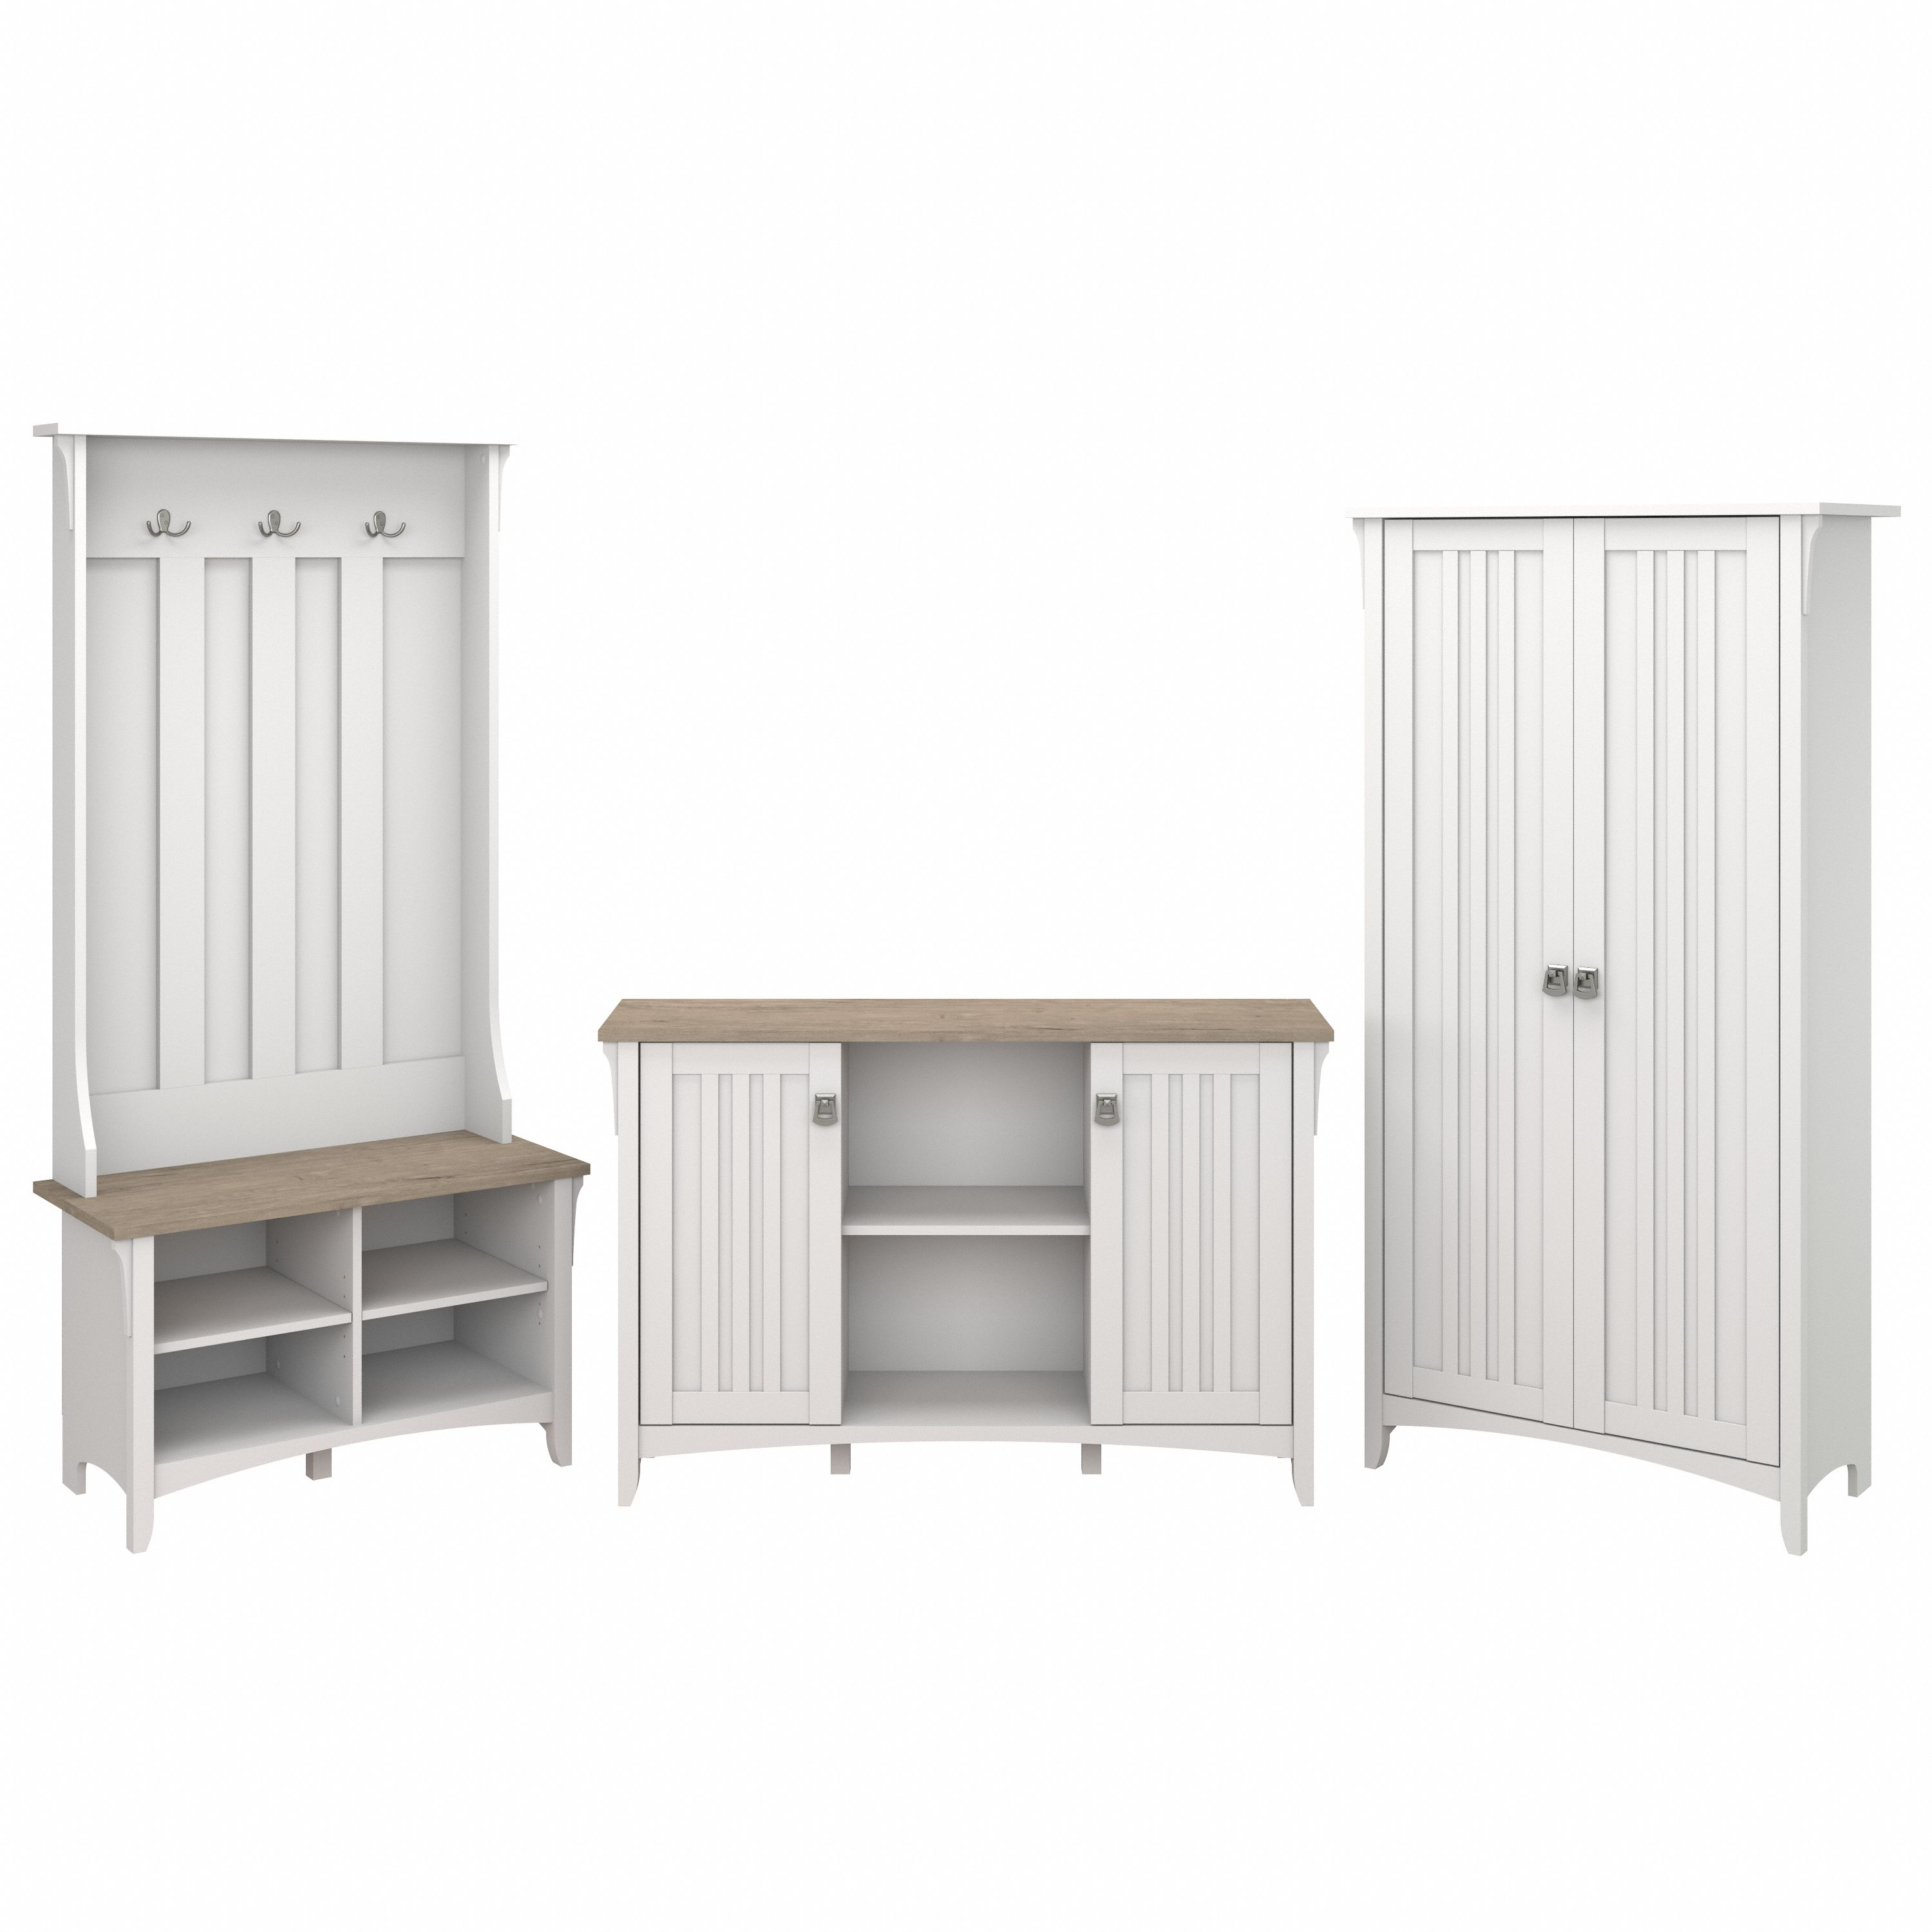 Shop Bush Furniture Salinas Entryway Storage Set with Hall Tree, Shoe Bench and Accent Cabinets 02 SAL016G2W #color_shiplap gray